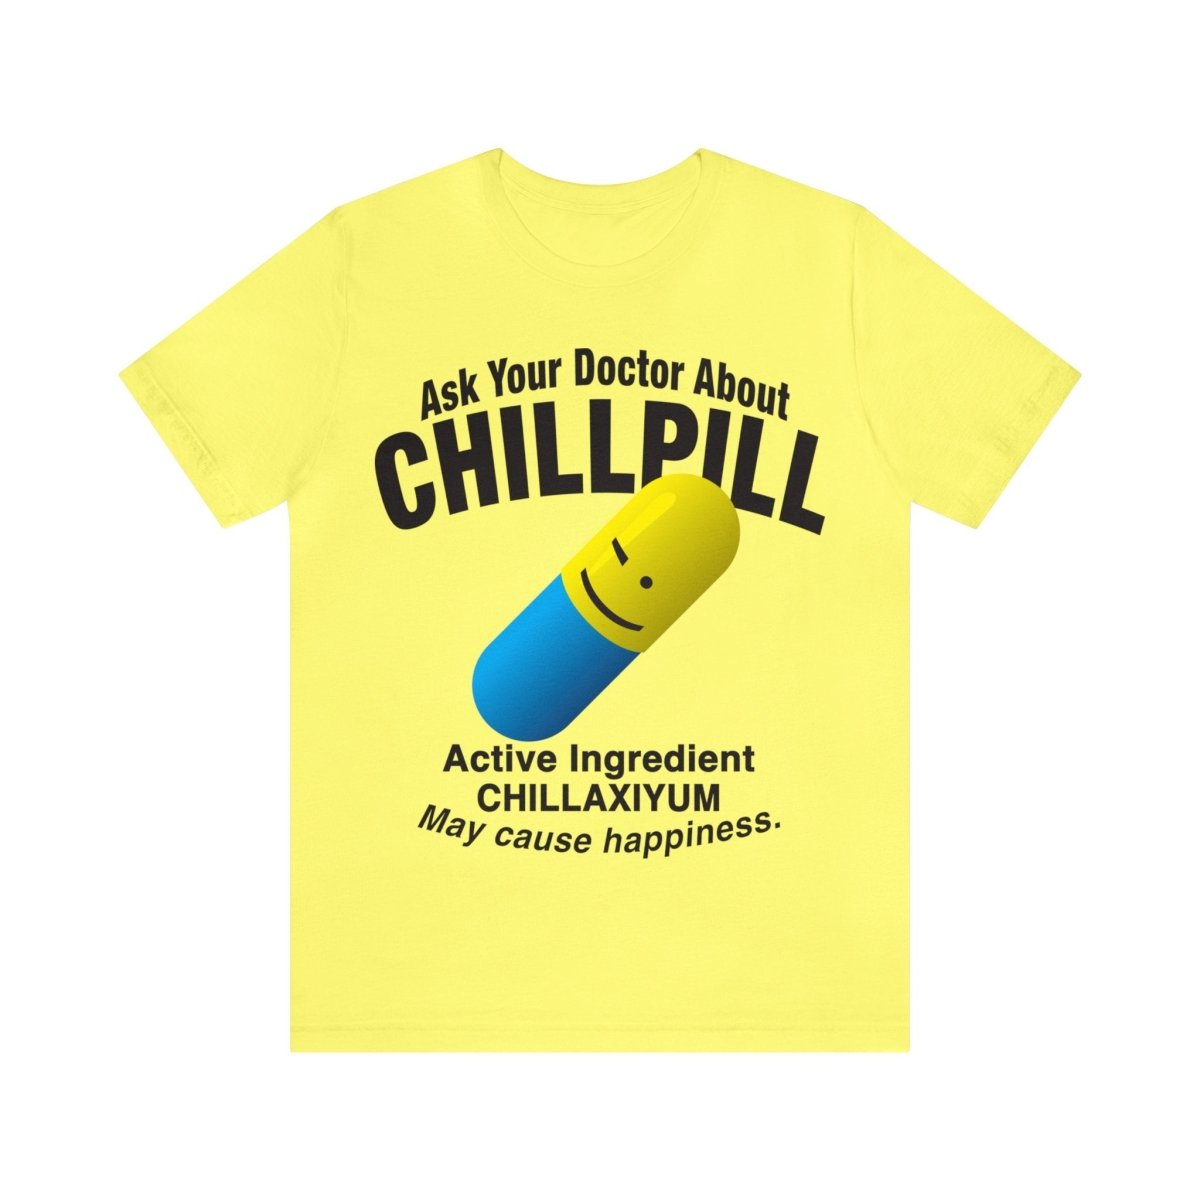 Chill Pill Premium T-Shirt, Ask Your Doctor About It, Active Ingredient CHILLAXIYUM, May Cause Happiness, Relaxation, Weekend, Funny